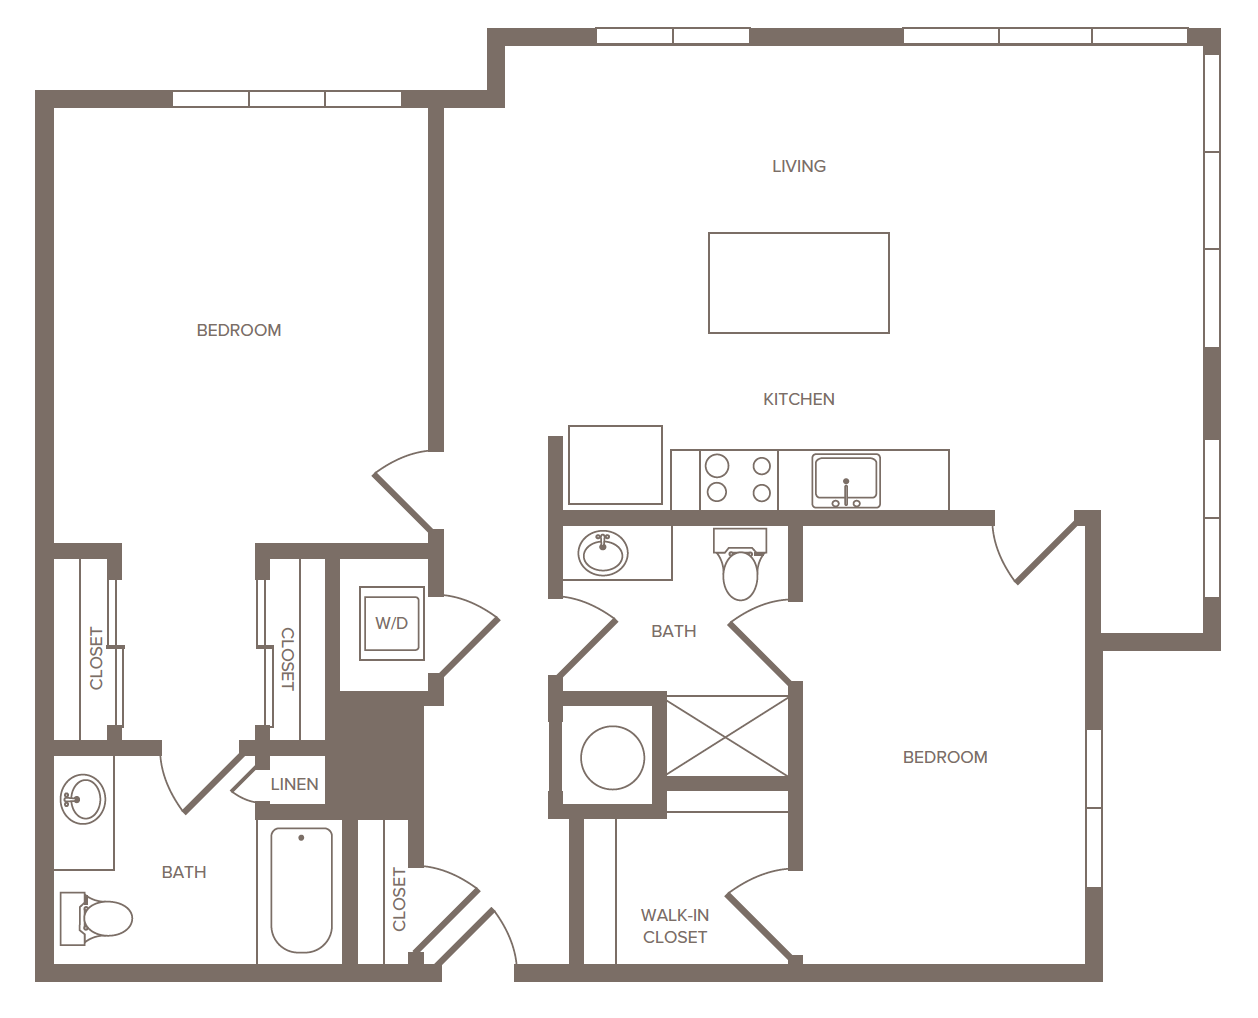 Floorplan for Apartment #1213, 2 bedroom unit at Halstead Parsippany